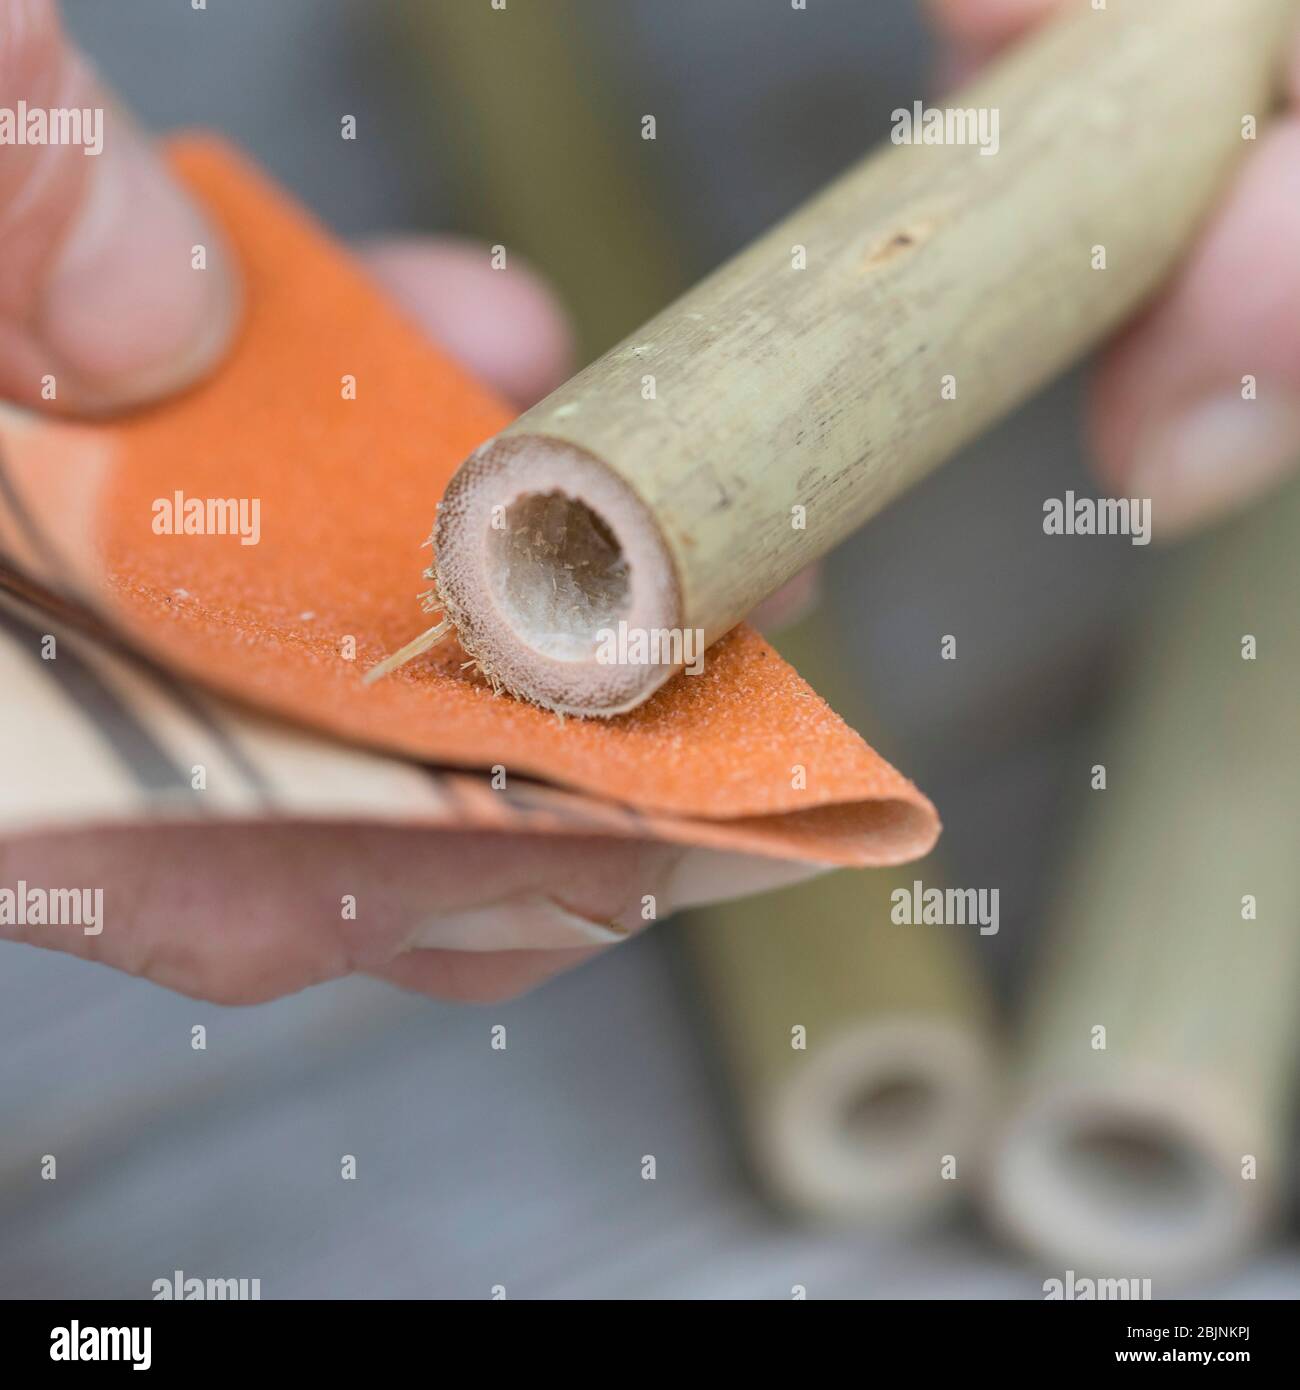 nesting aid for wild bees, step two: smoothing bamboo with emery paper Stock Photo